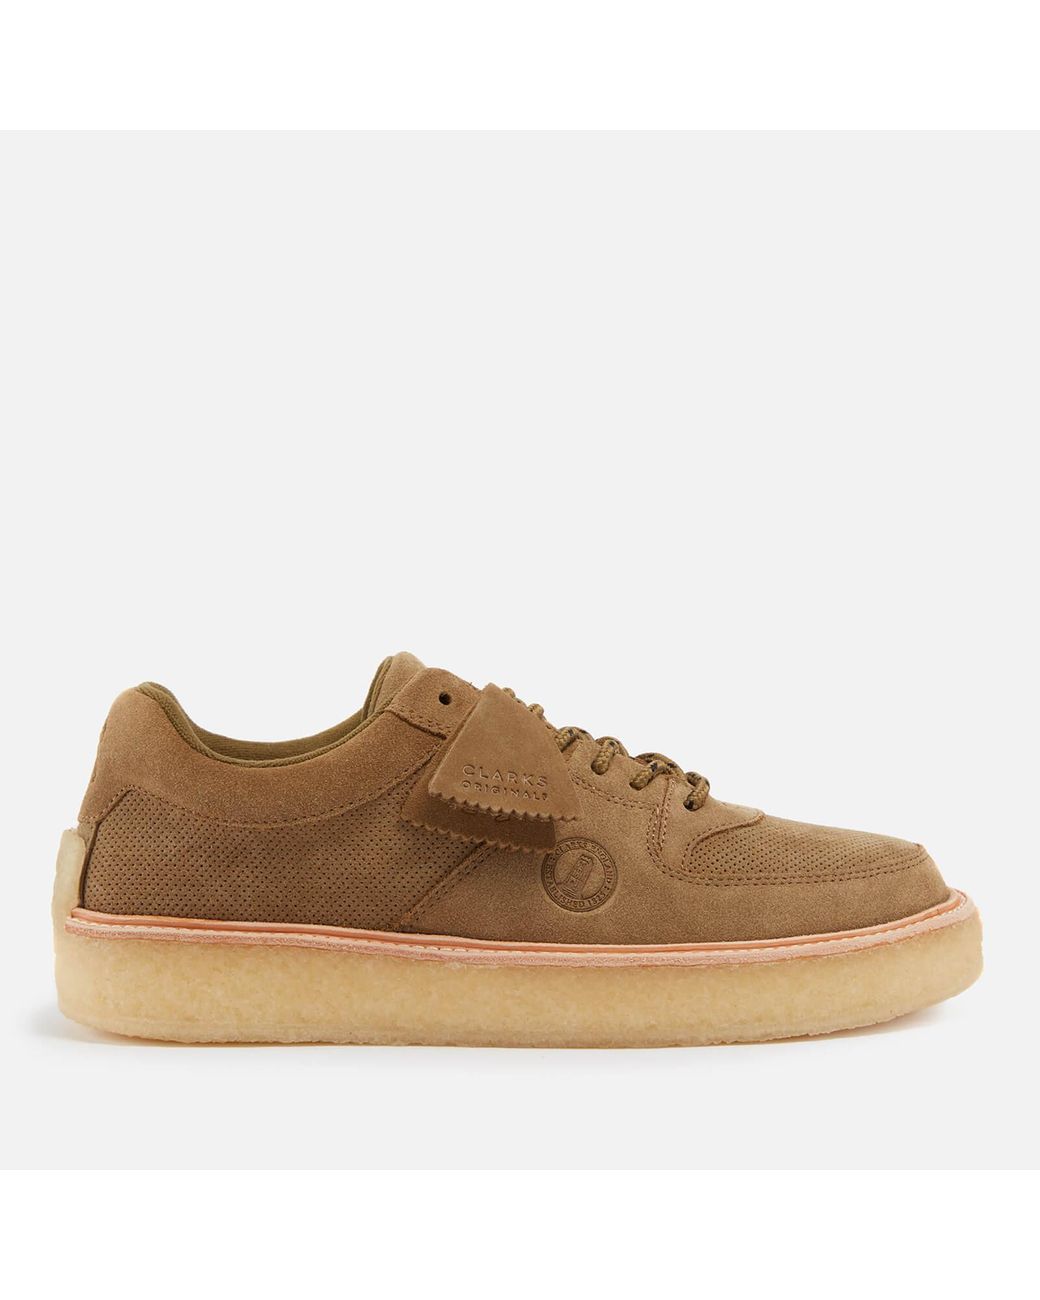 Clarks X Ronnie Fieg Sandford Suede Trainers in Brown for Men | Lyst